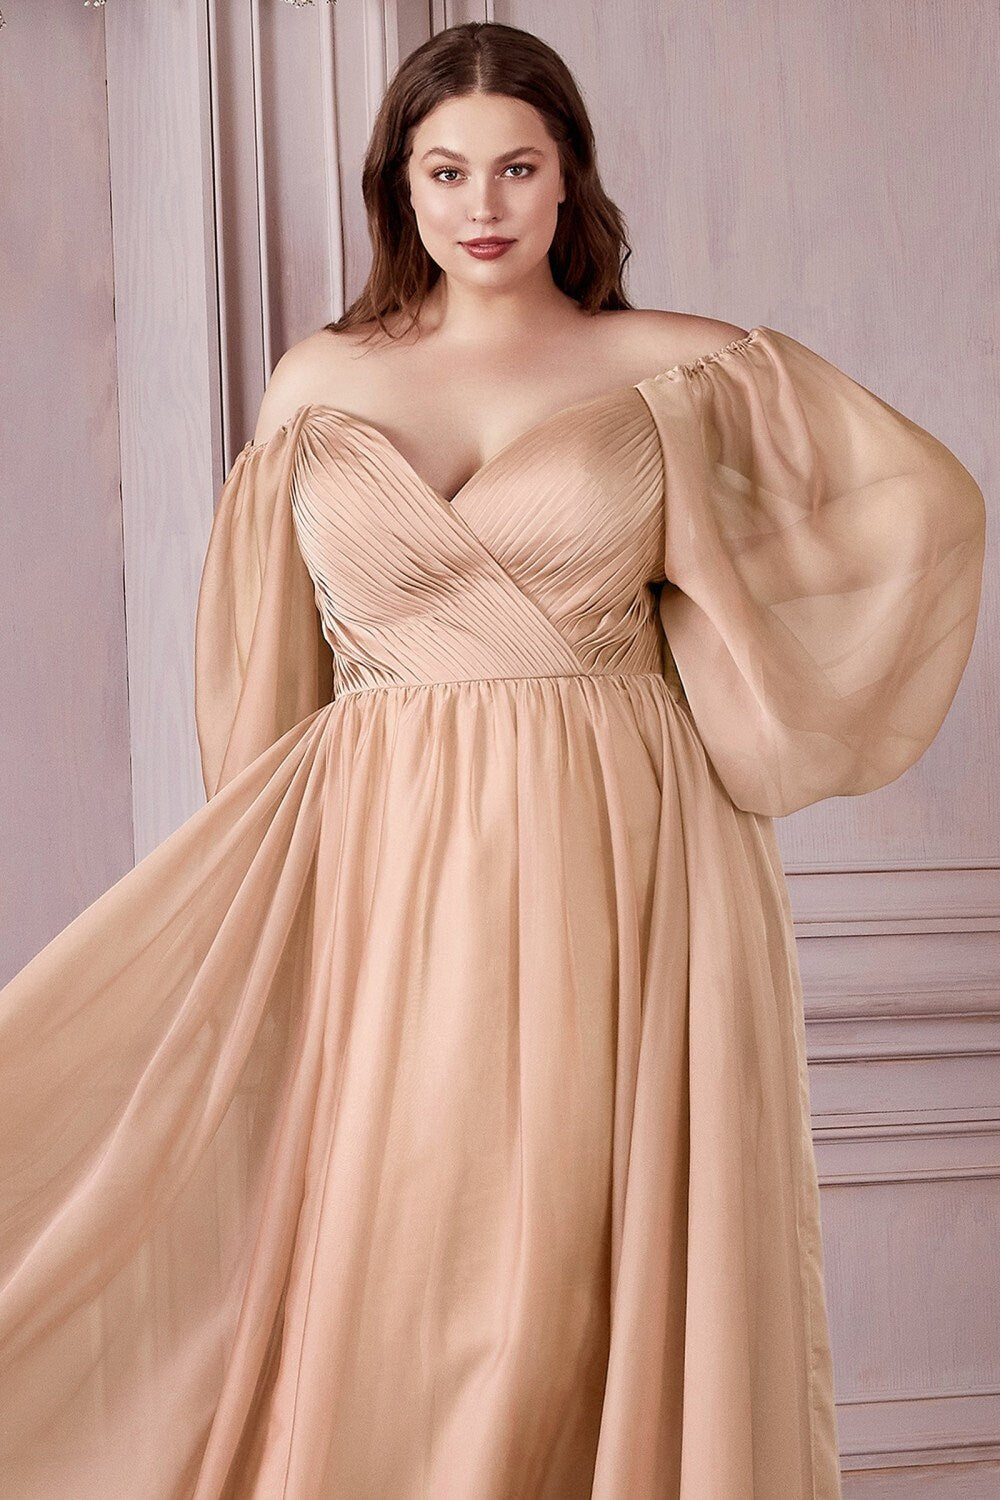 Beautiful Unique Jewel Tone Long Sleeve Chiffon Aline Dress Off the Shoulder Sweetheart Neckline Prom Formal Gown Bridesmaid Dress